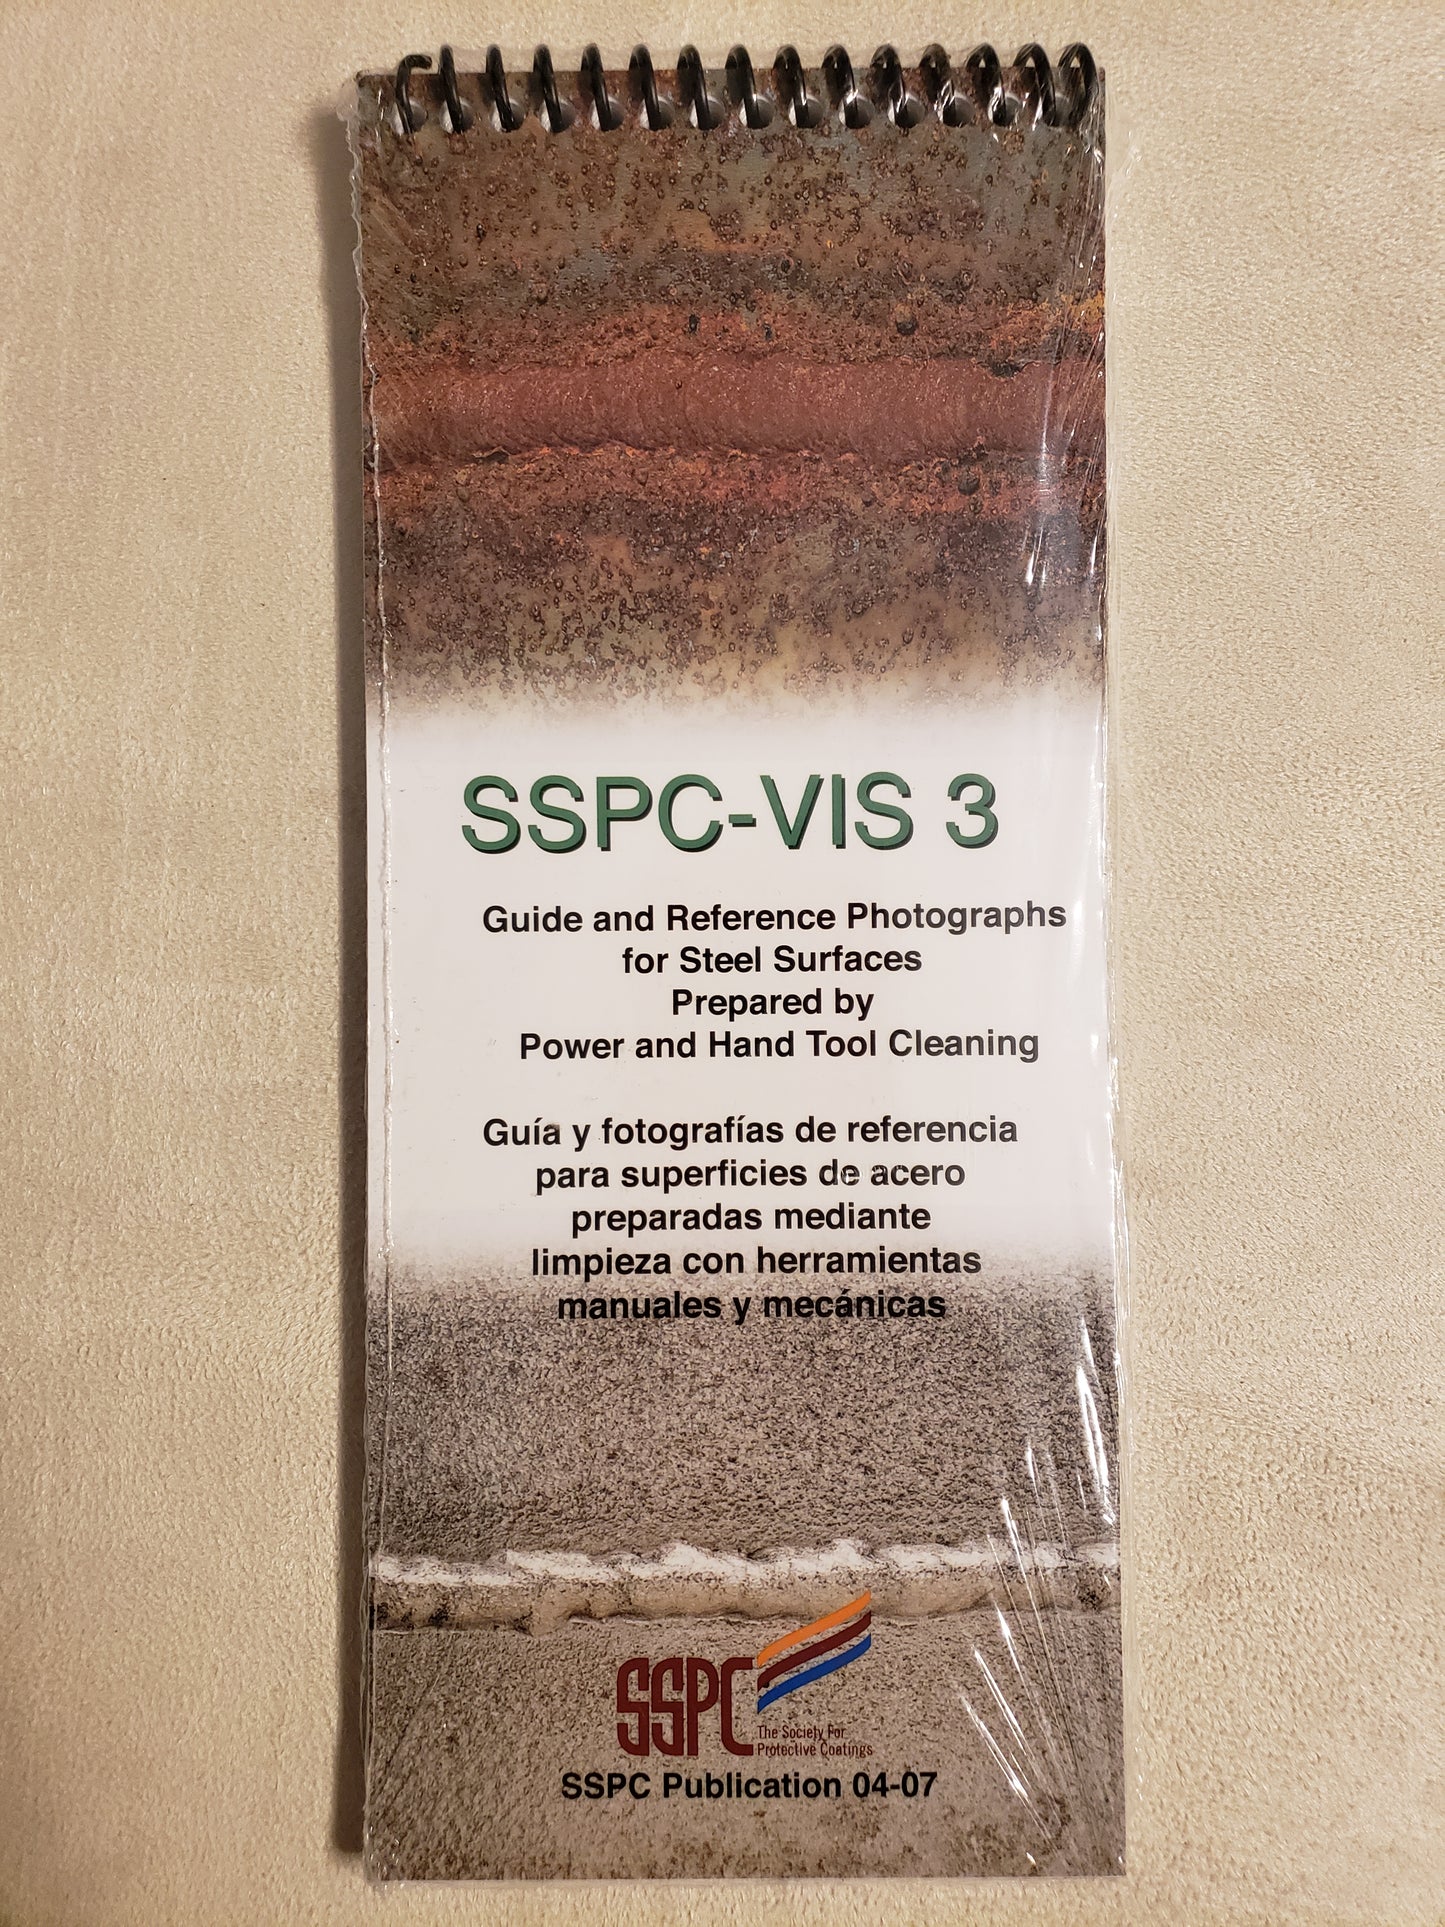 SSPC VIS 3 guide and reference photographs for steel surfaces prepared by power and hand tool cleaning